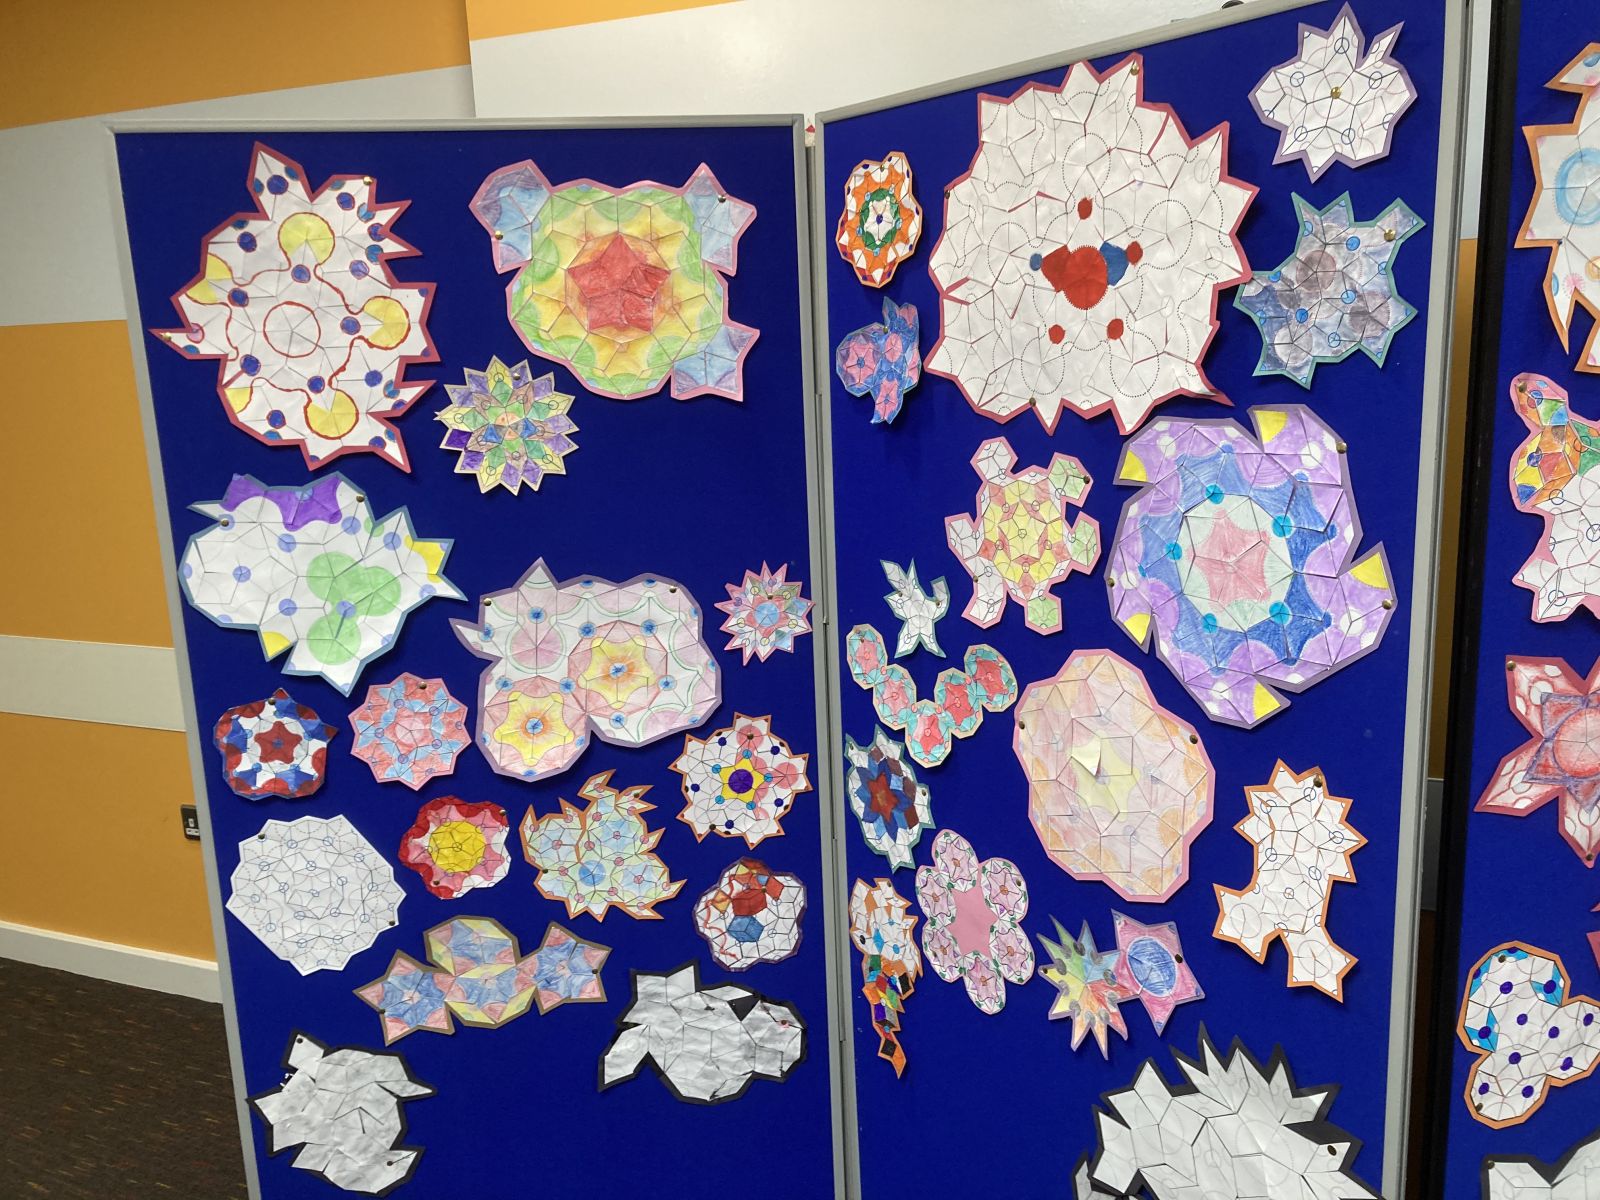 Example of aperiodic tilings created by Kents Hill Park School